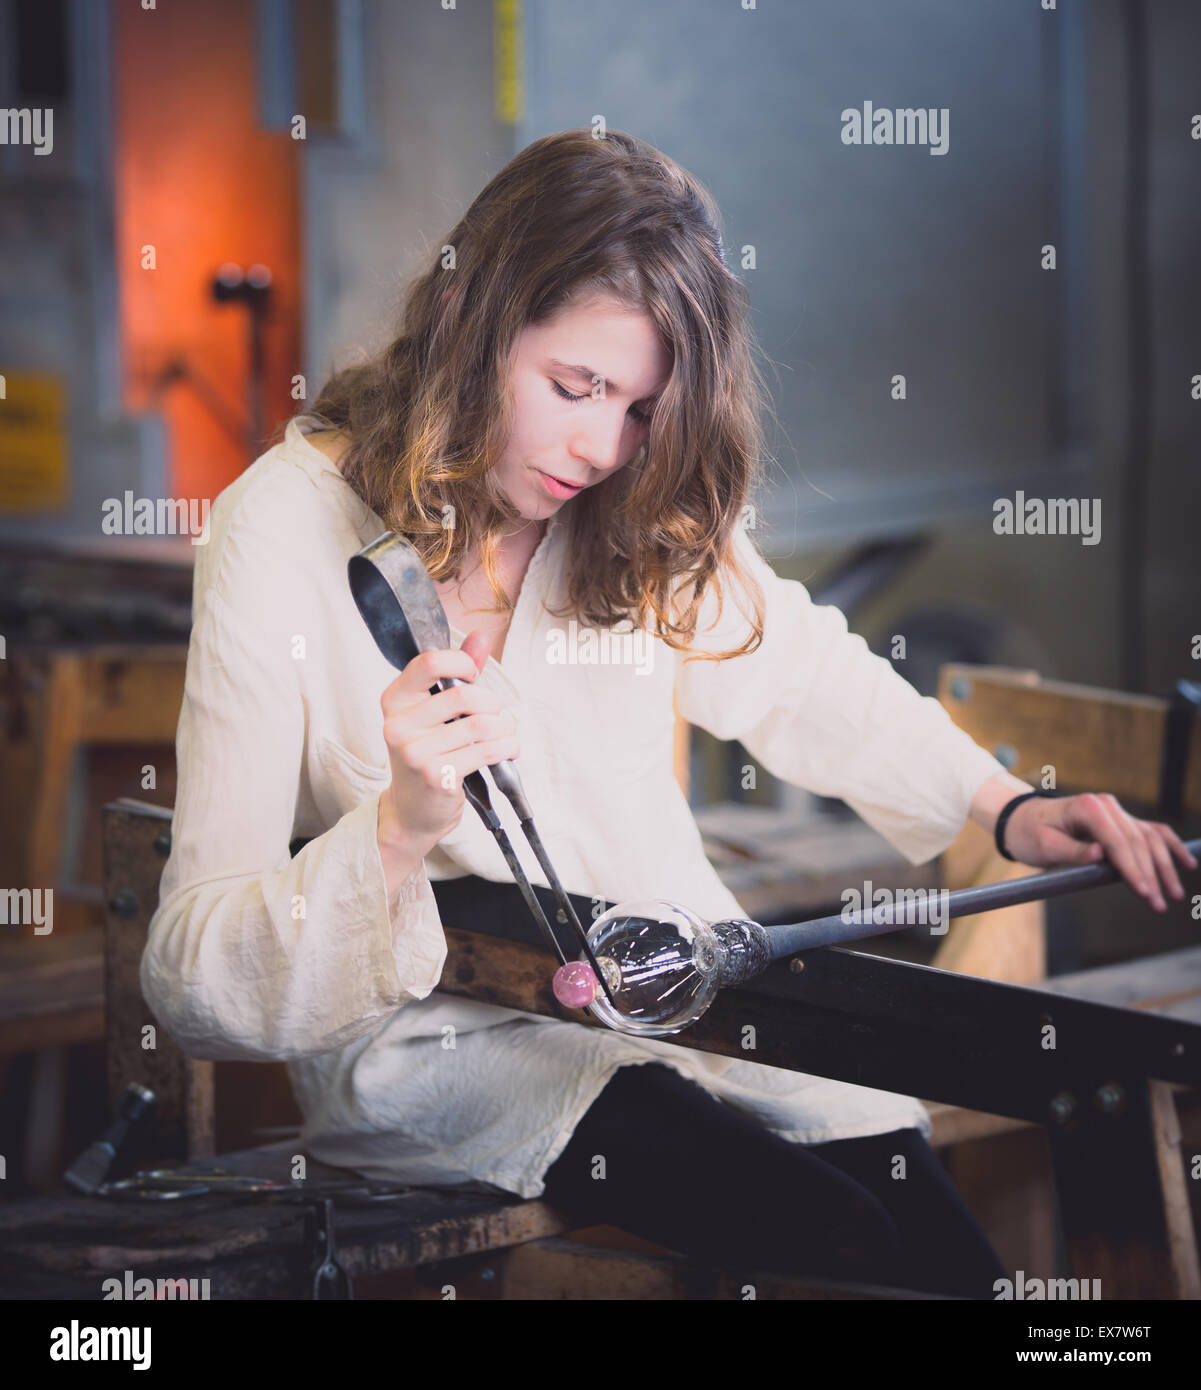 A working girl in the hot shop of a glass work Stock Photo